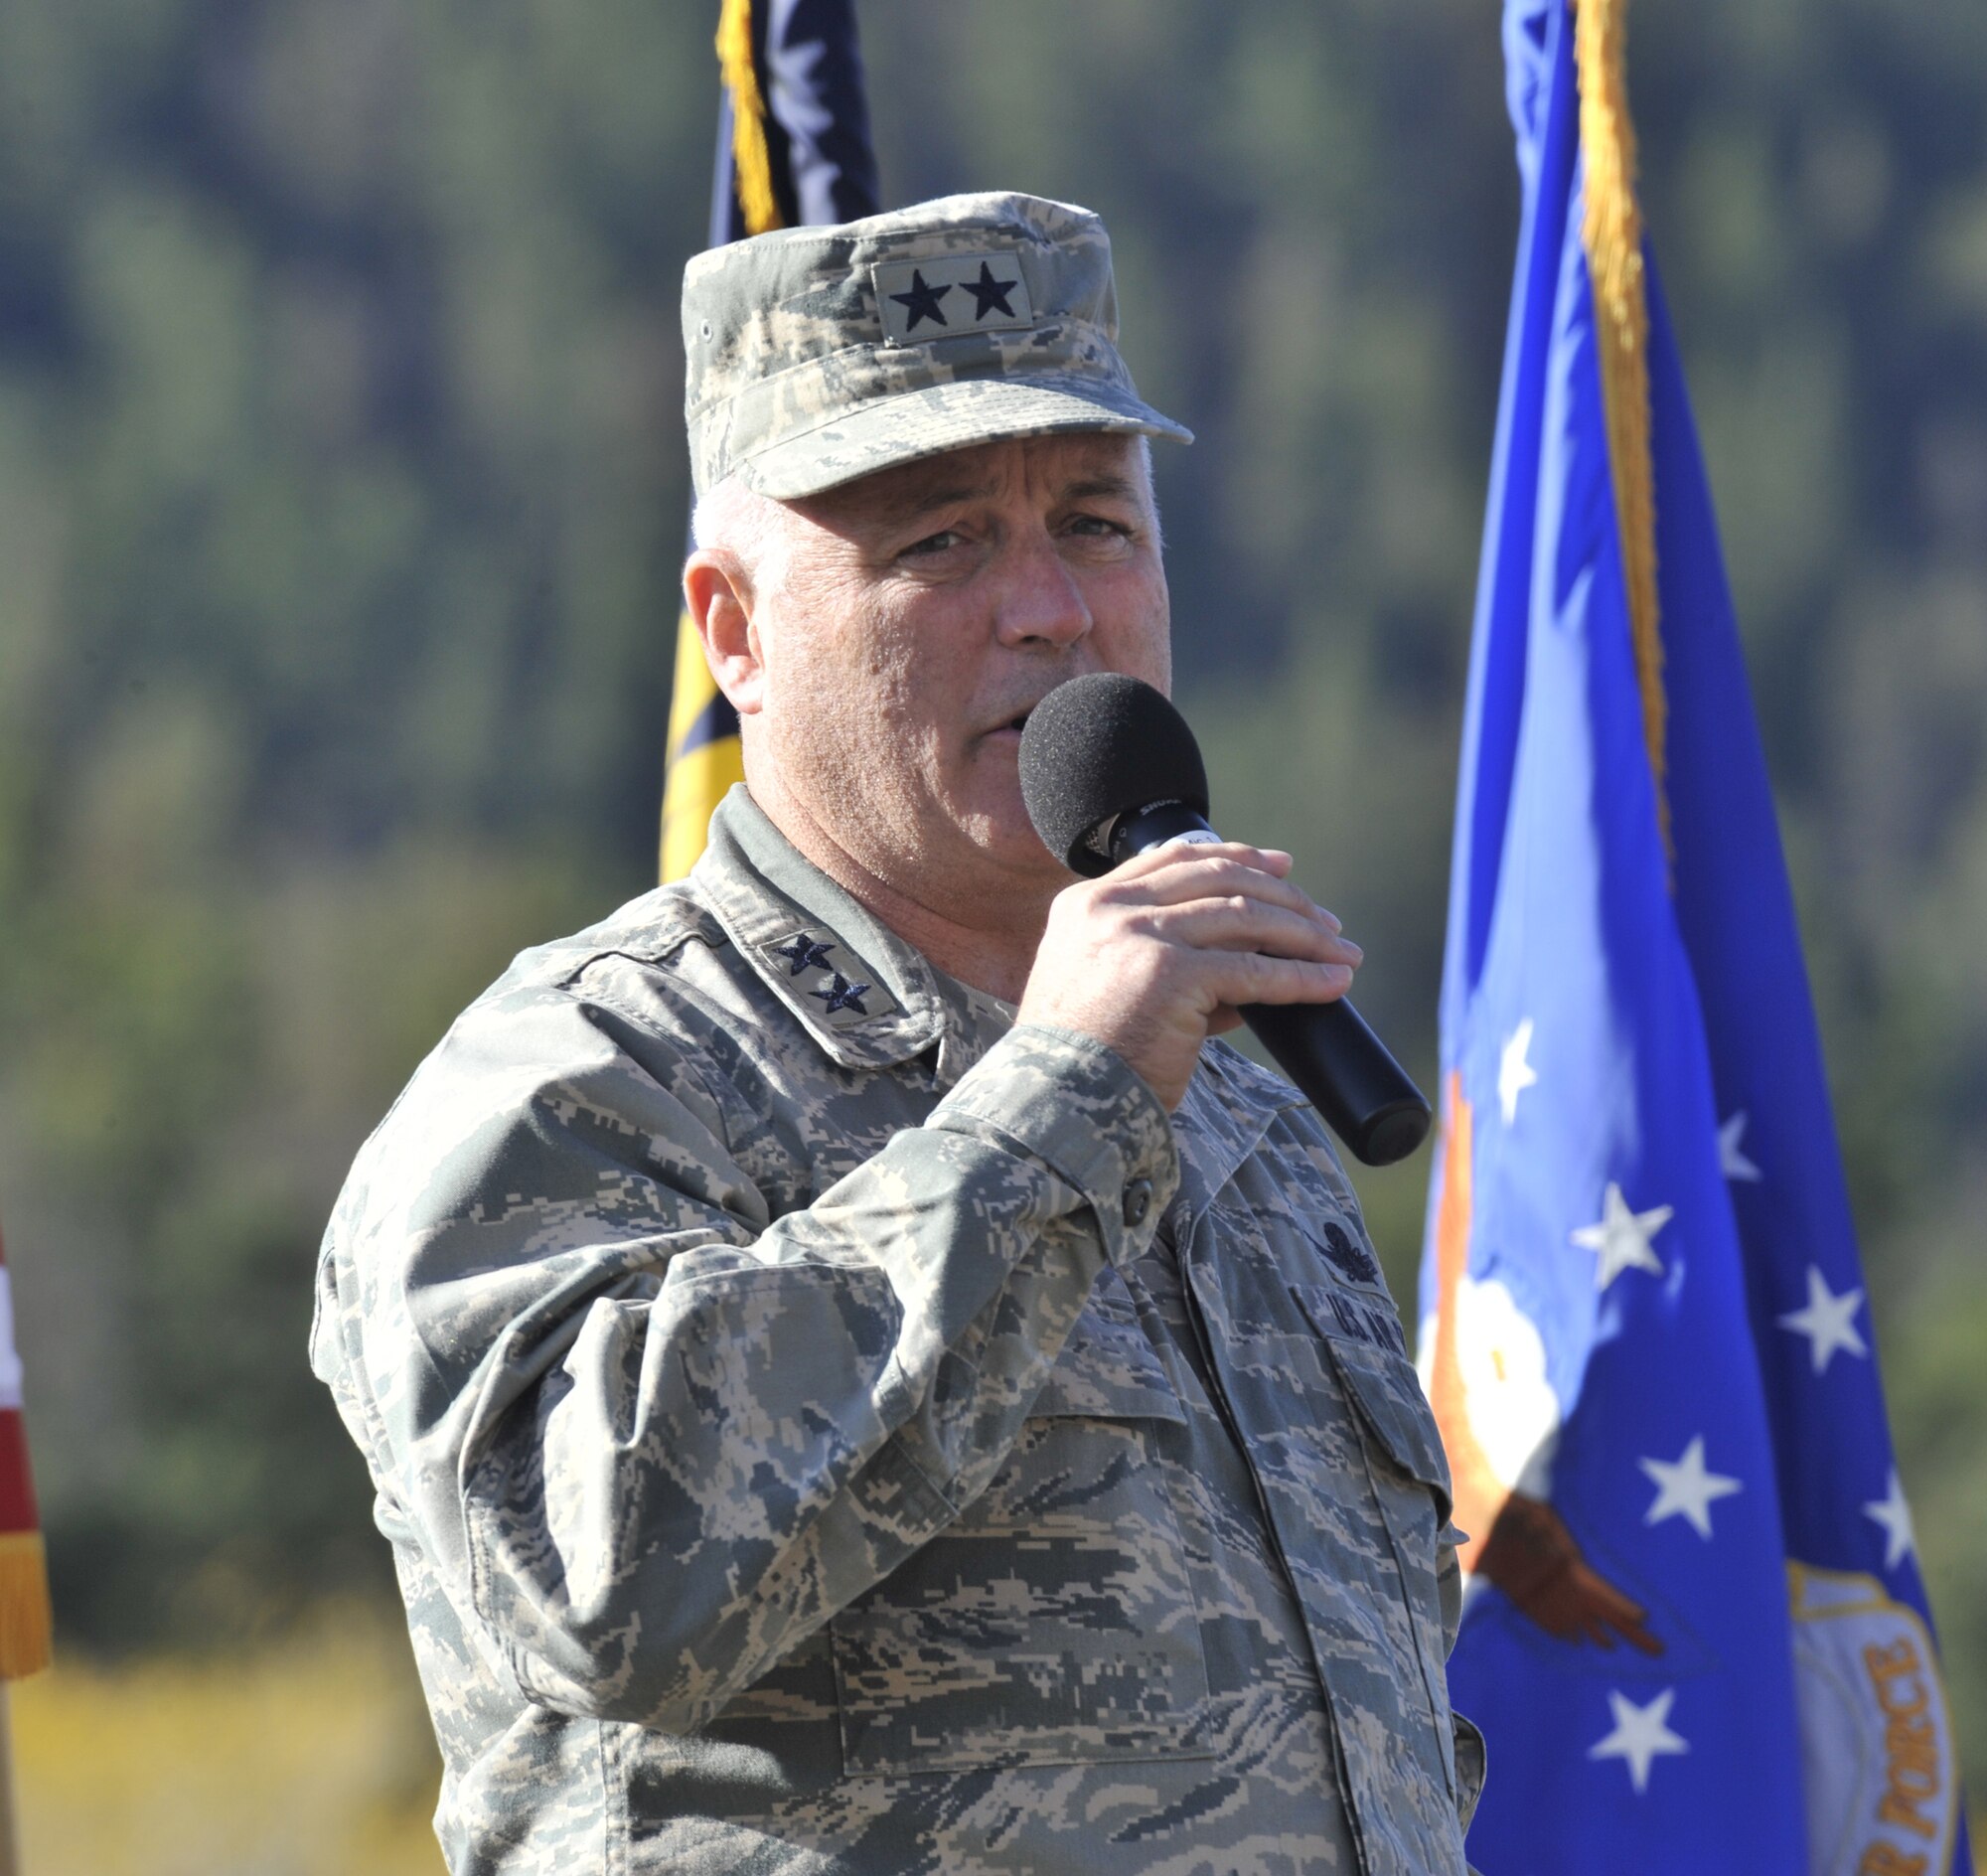 Maj. Gen. Michael Carey, 20th Air Force commander, addresses the hundreds gathered at A-06 launch facility on Oct. 13 to celebrate the 50th Anniversary of the first Minuteman Missile being on alert in support of the Cuban Missile Crisis. All three missile wings – the 341st at Malmstrom, the 90th at F.E. Warren Air Force Base, Wyo., and the 91st at Minot AFB, N.D. – fall under his command. (U.S. Air Force photo/John Turner)